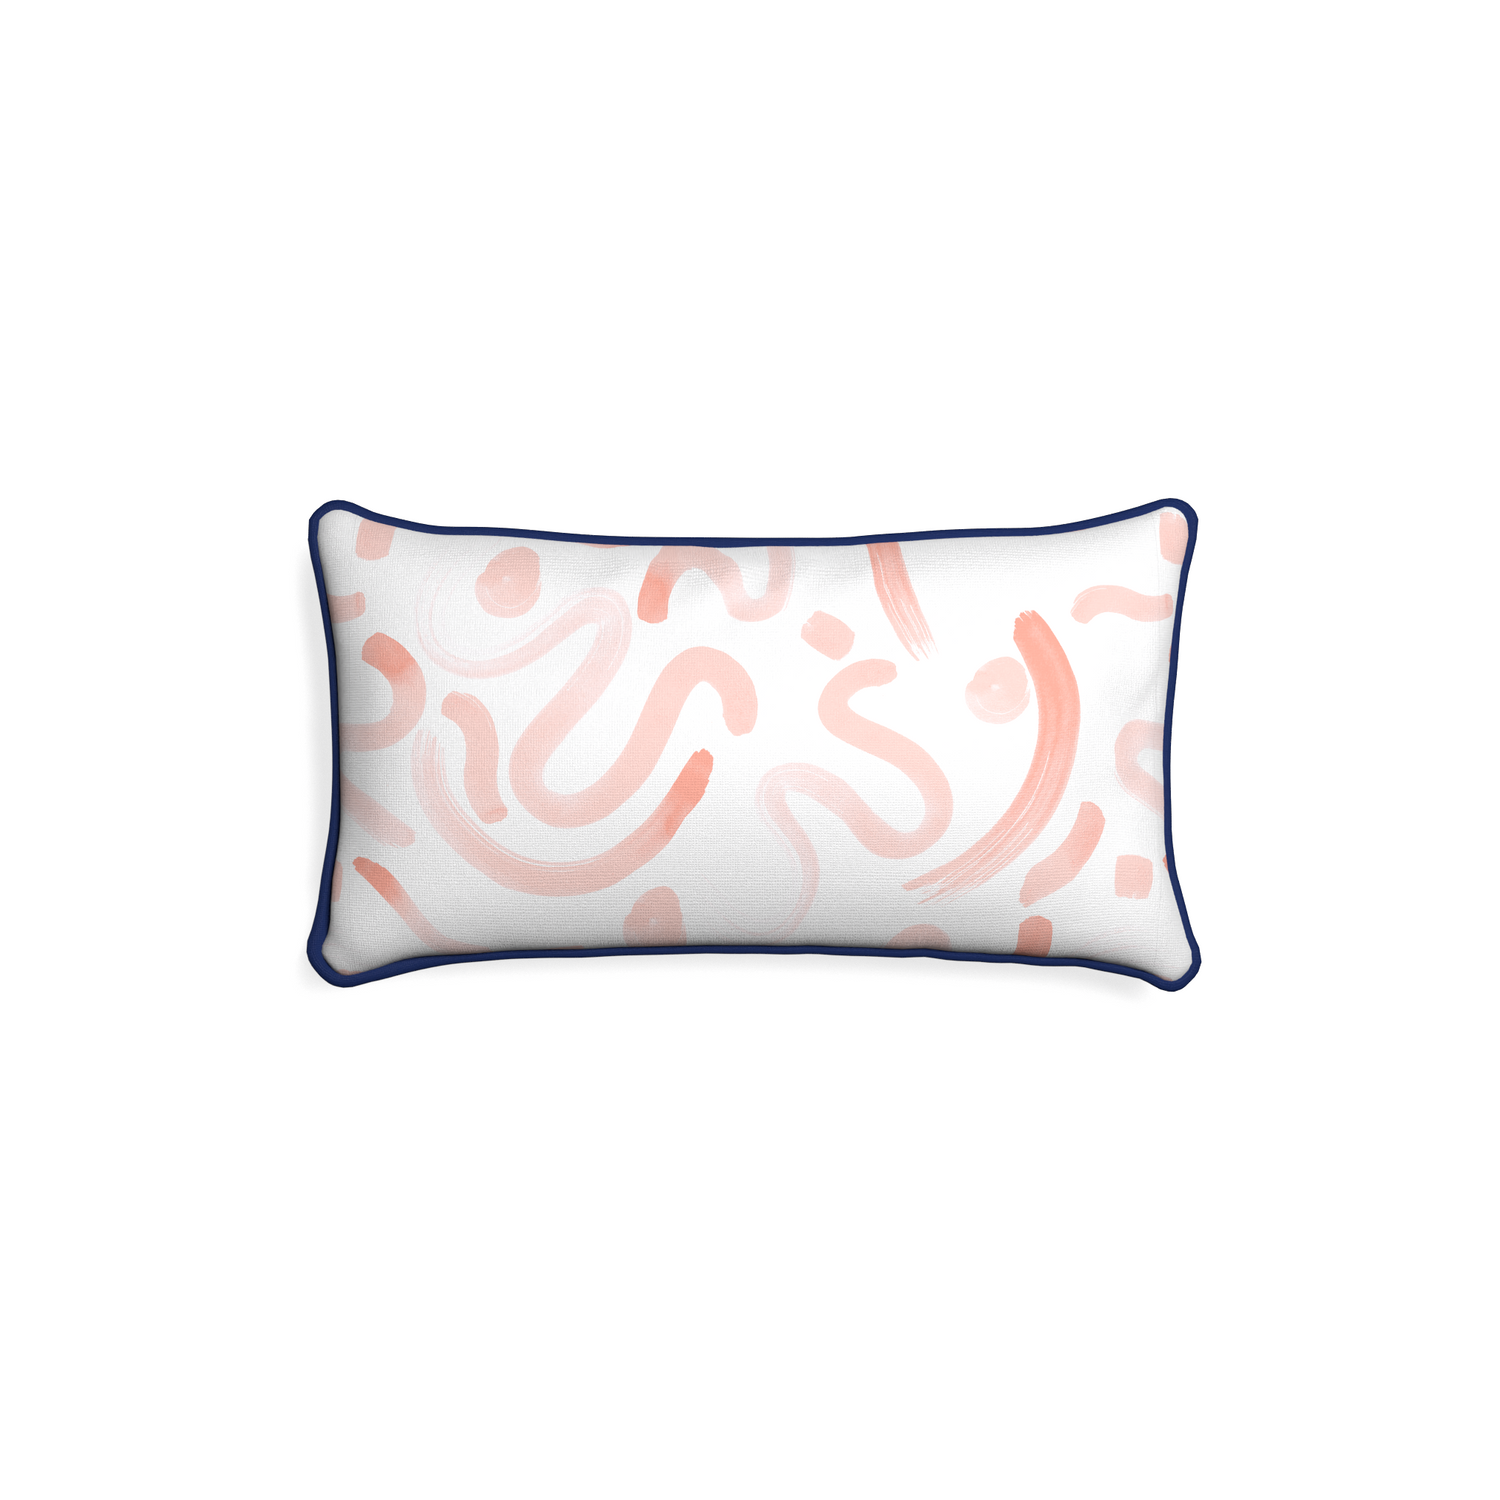 Petite-lumbar hockney pink custom pink graphicpillow with midnight piping on white background